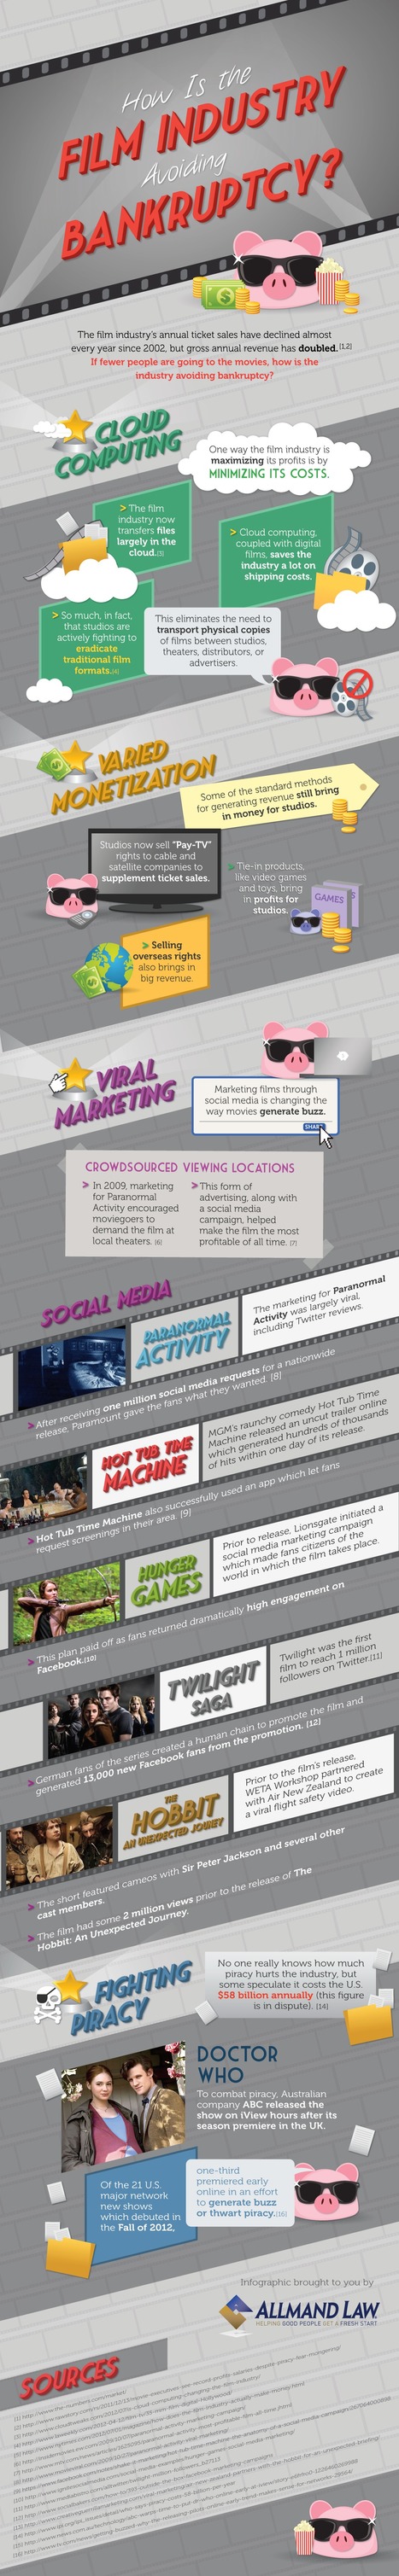 How Social Media and Viral Marketing are Saving the Film Industry [INFOGRAPHIC] | Better know and better use Social Media today (facebook, twitter...) | Scoop.it